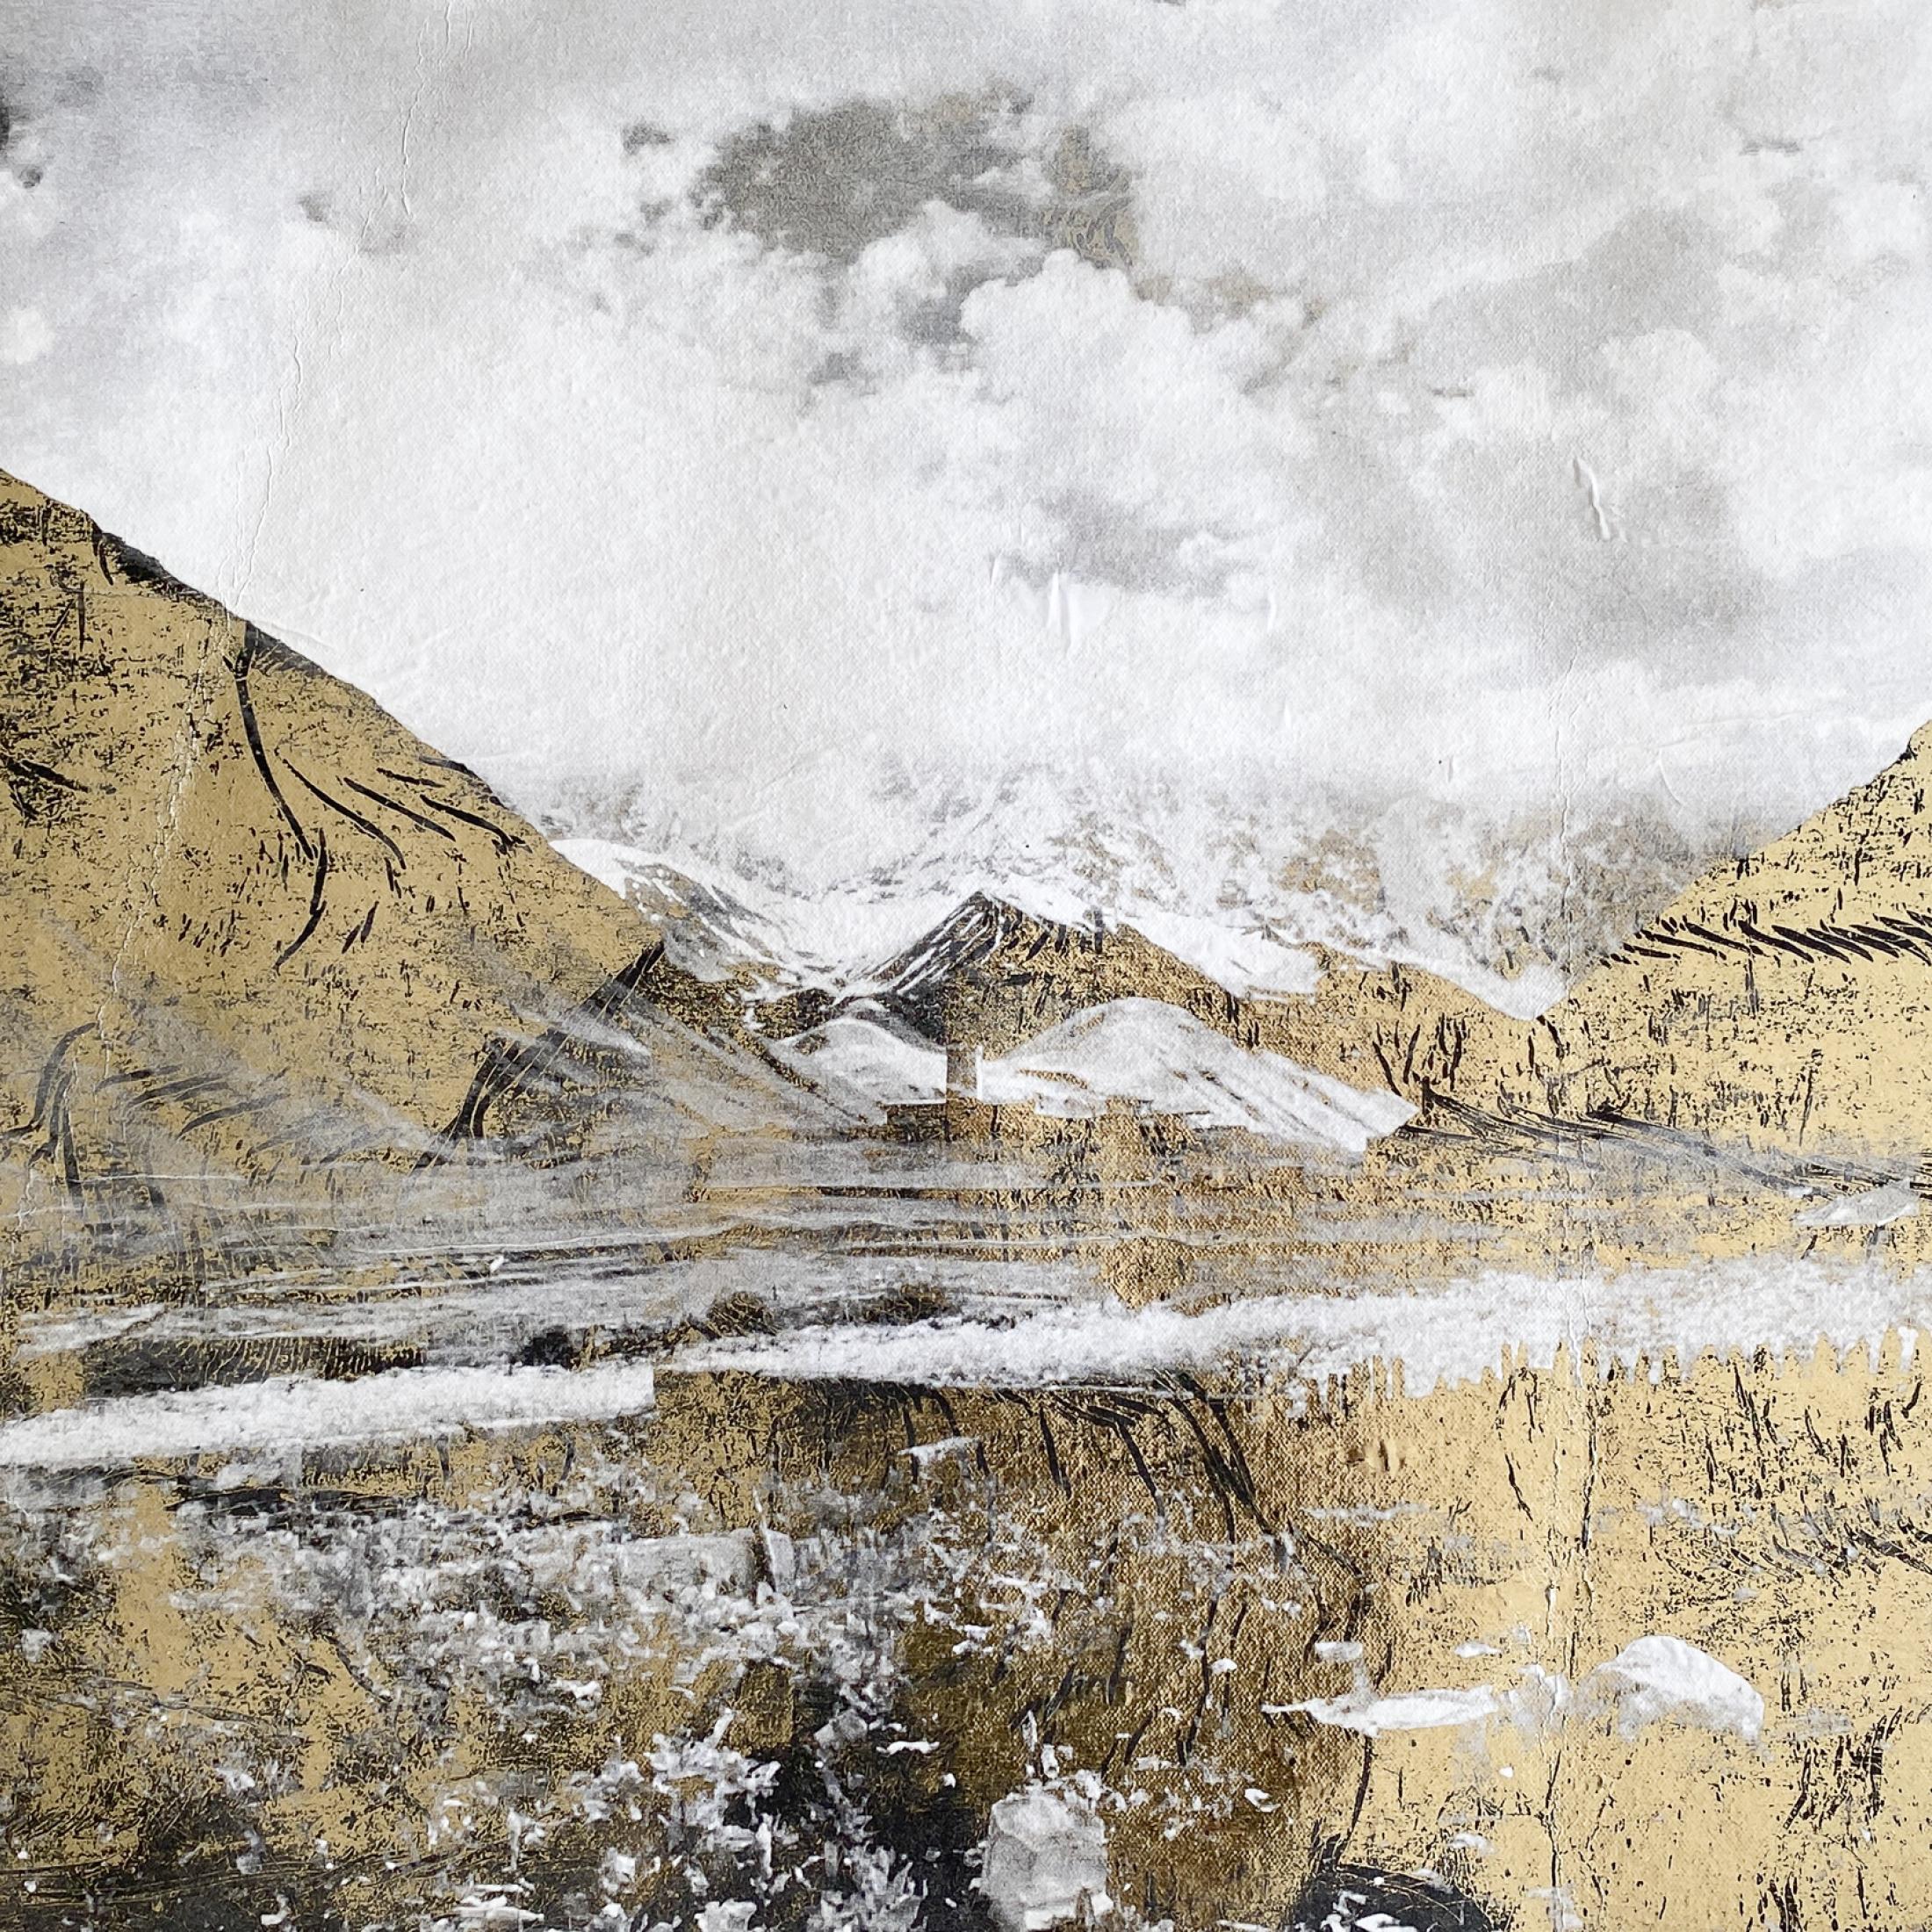 USHGULI WITH SHAKRA MOUNTAIN by artist Bill Claps is a white, gold, and brown contemporary landscape mixed media on canvas that measures 22 x 32

Visual artist and writer Bill Claps meditates every morning. “I find that the most important thing to